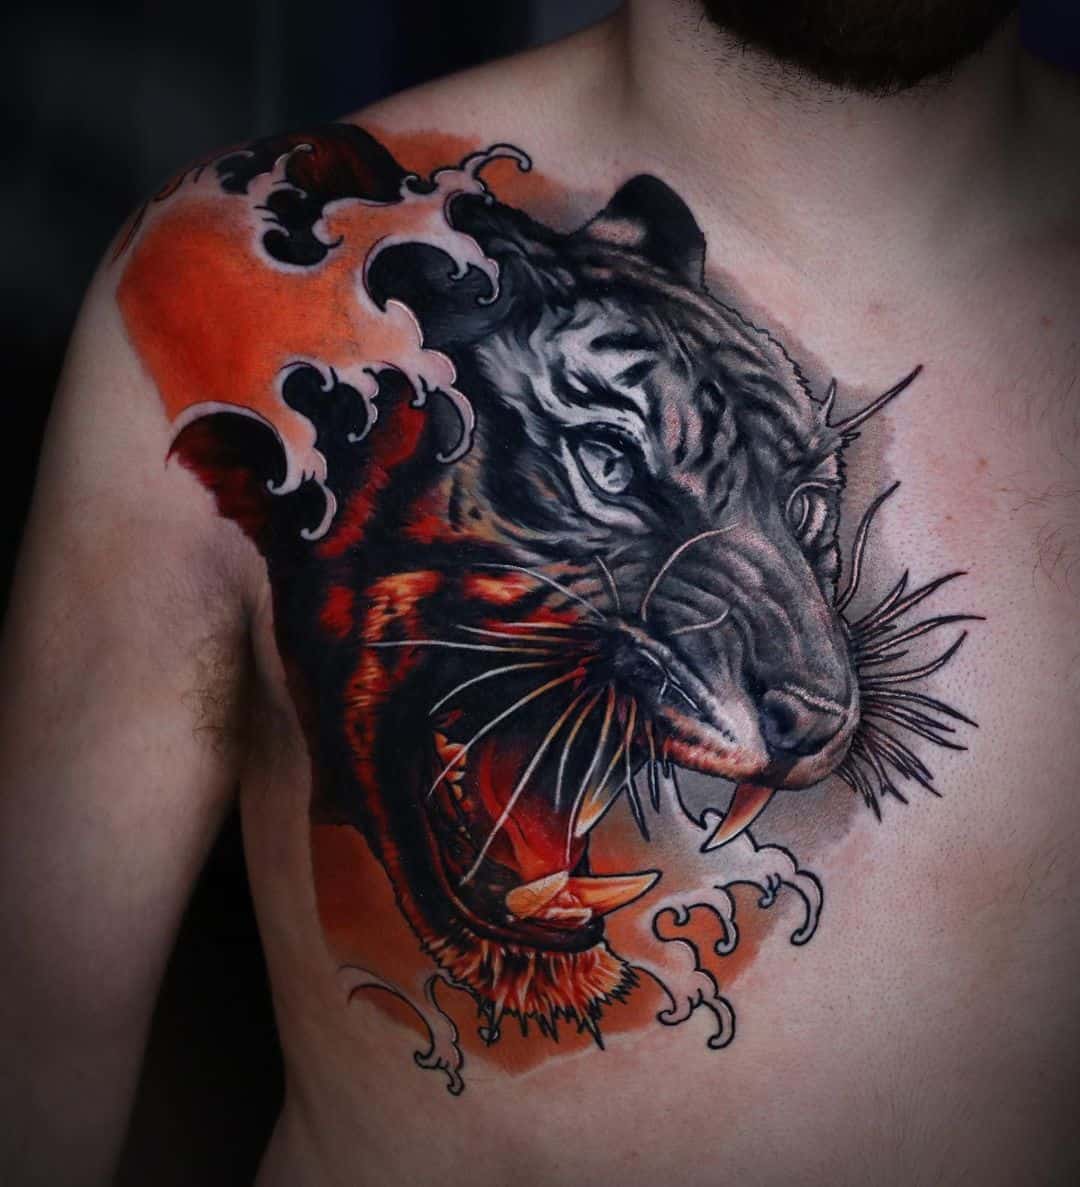 Bengal tiger tattoo design by cloutiermichael